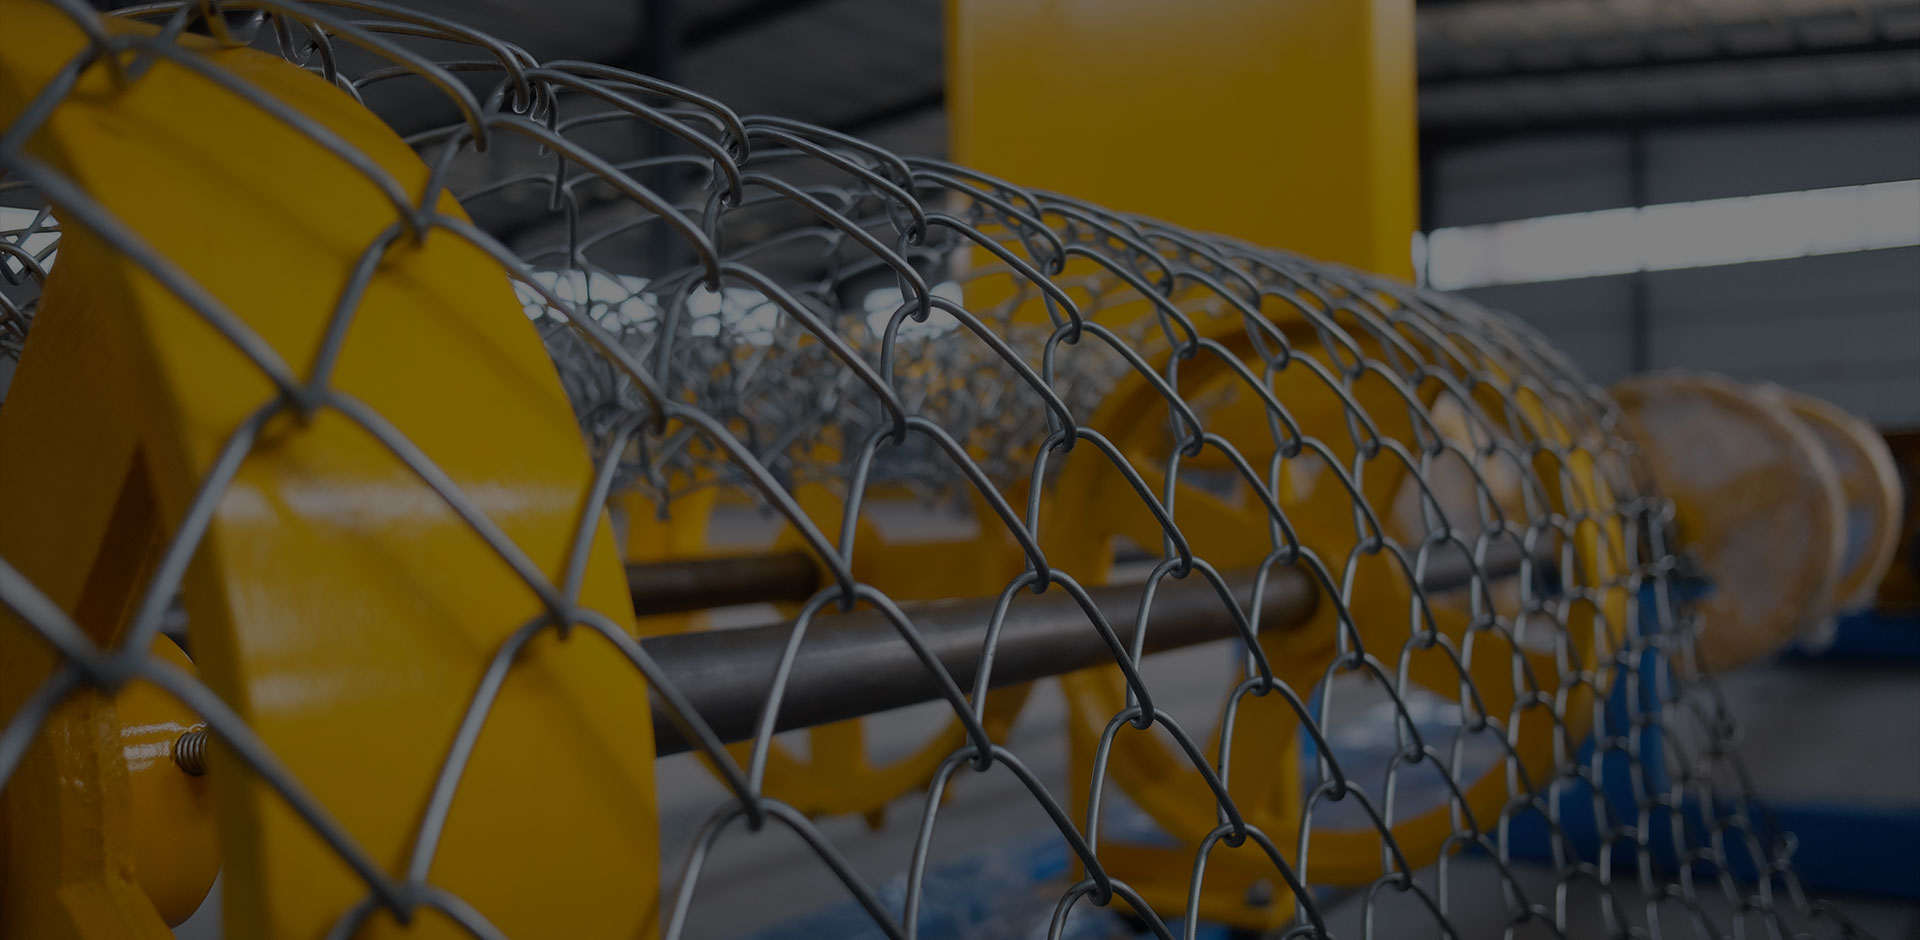 Wire and Wire Mesh For Galvanized Poultry Net In Metal Tech